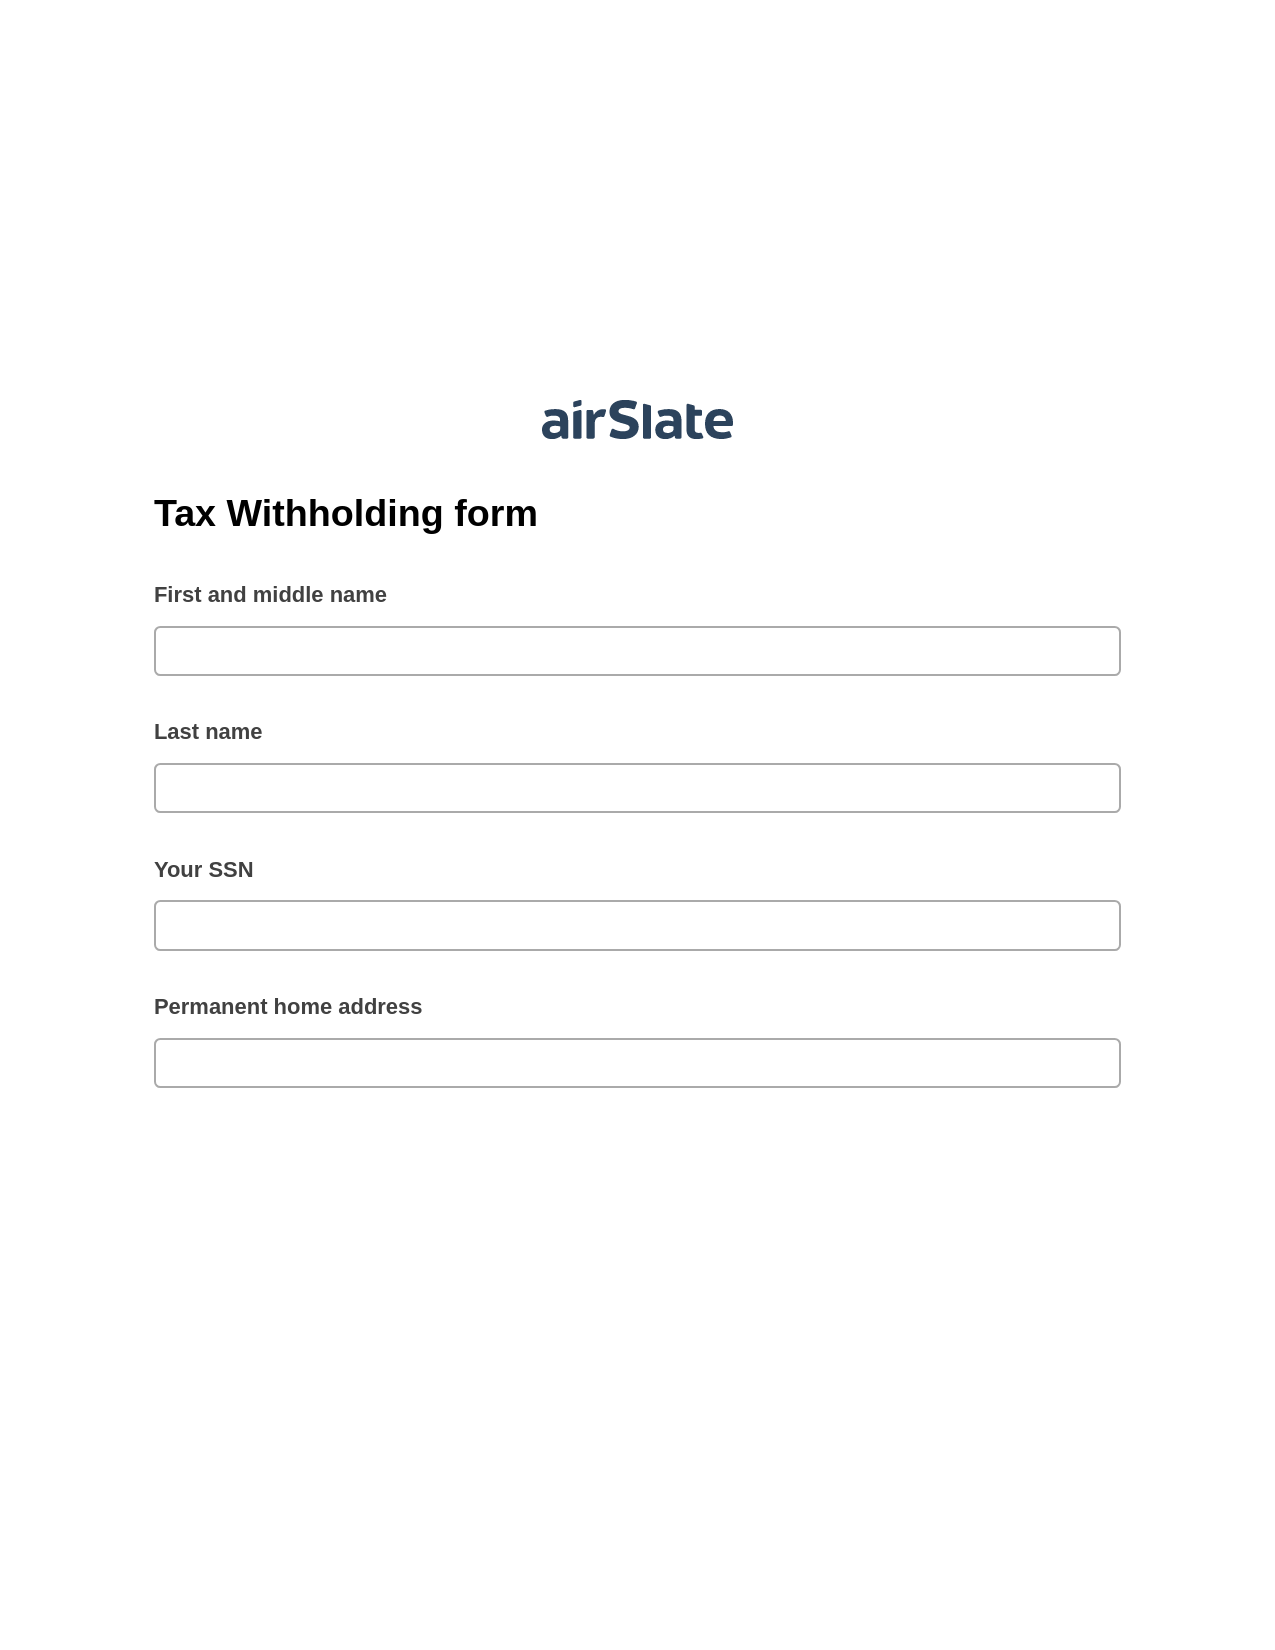 Multirole Tax Withholding form Pre-fill Slate from MS Dynamics 365 Records Bot, Create NetSuite Records Bot, Export to NetSuite Bot